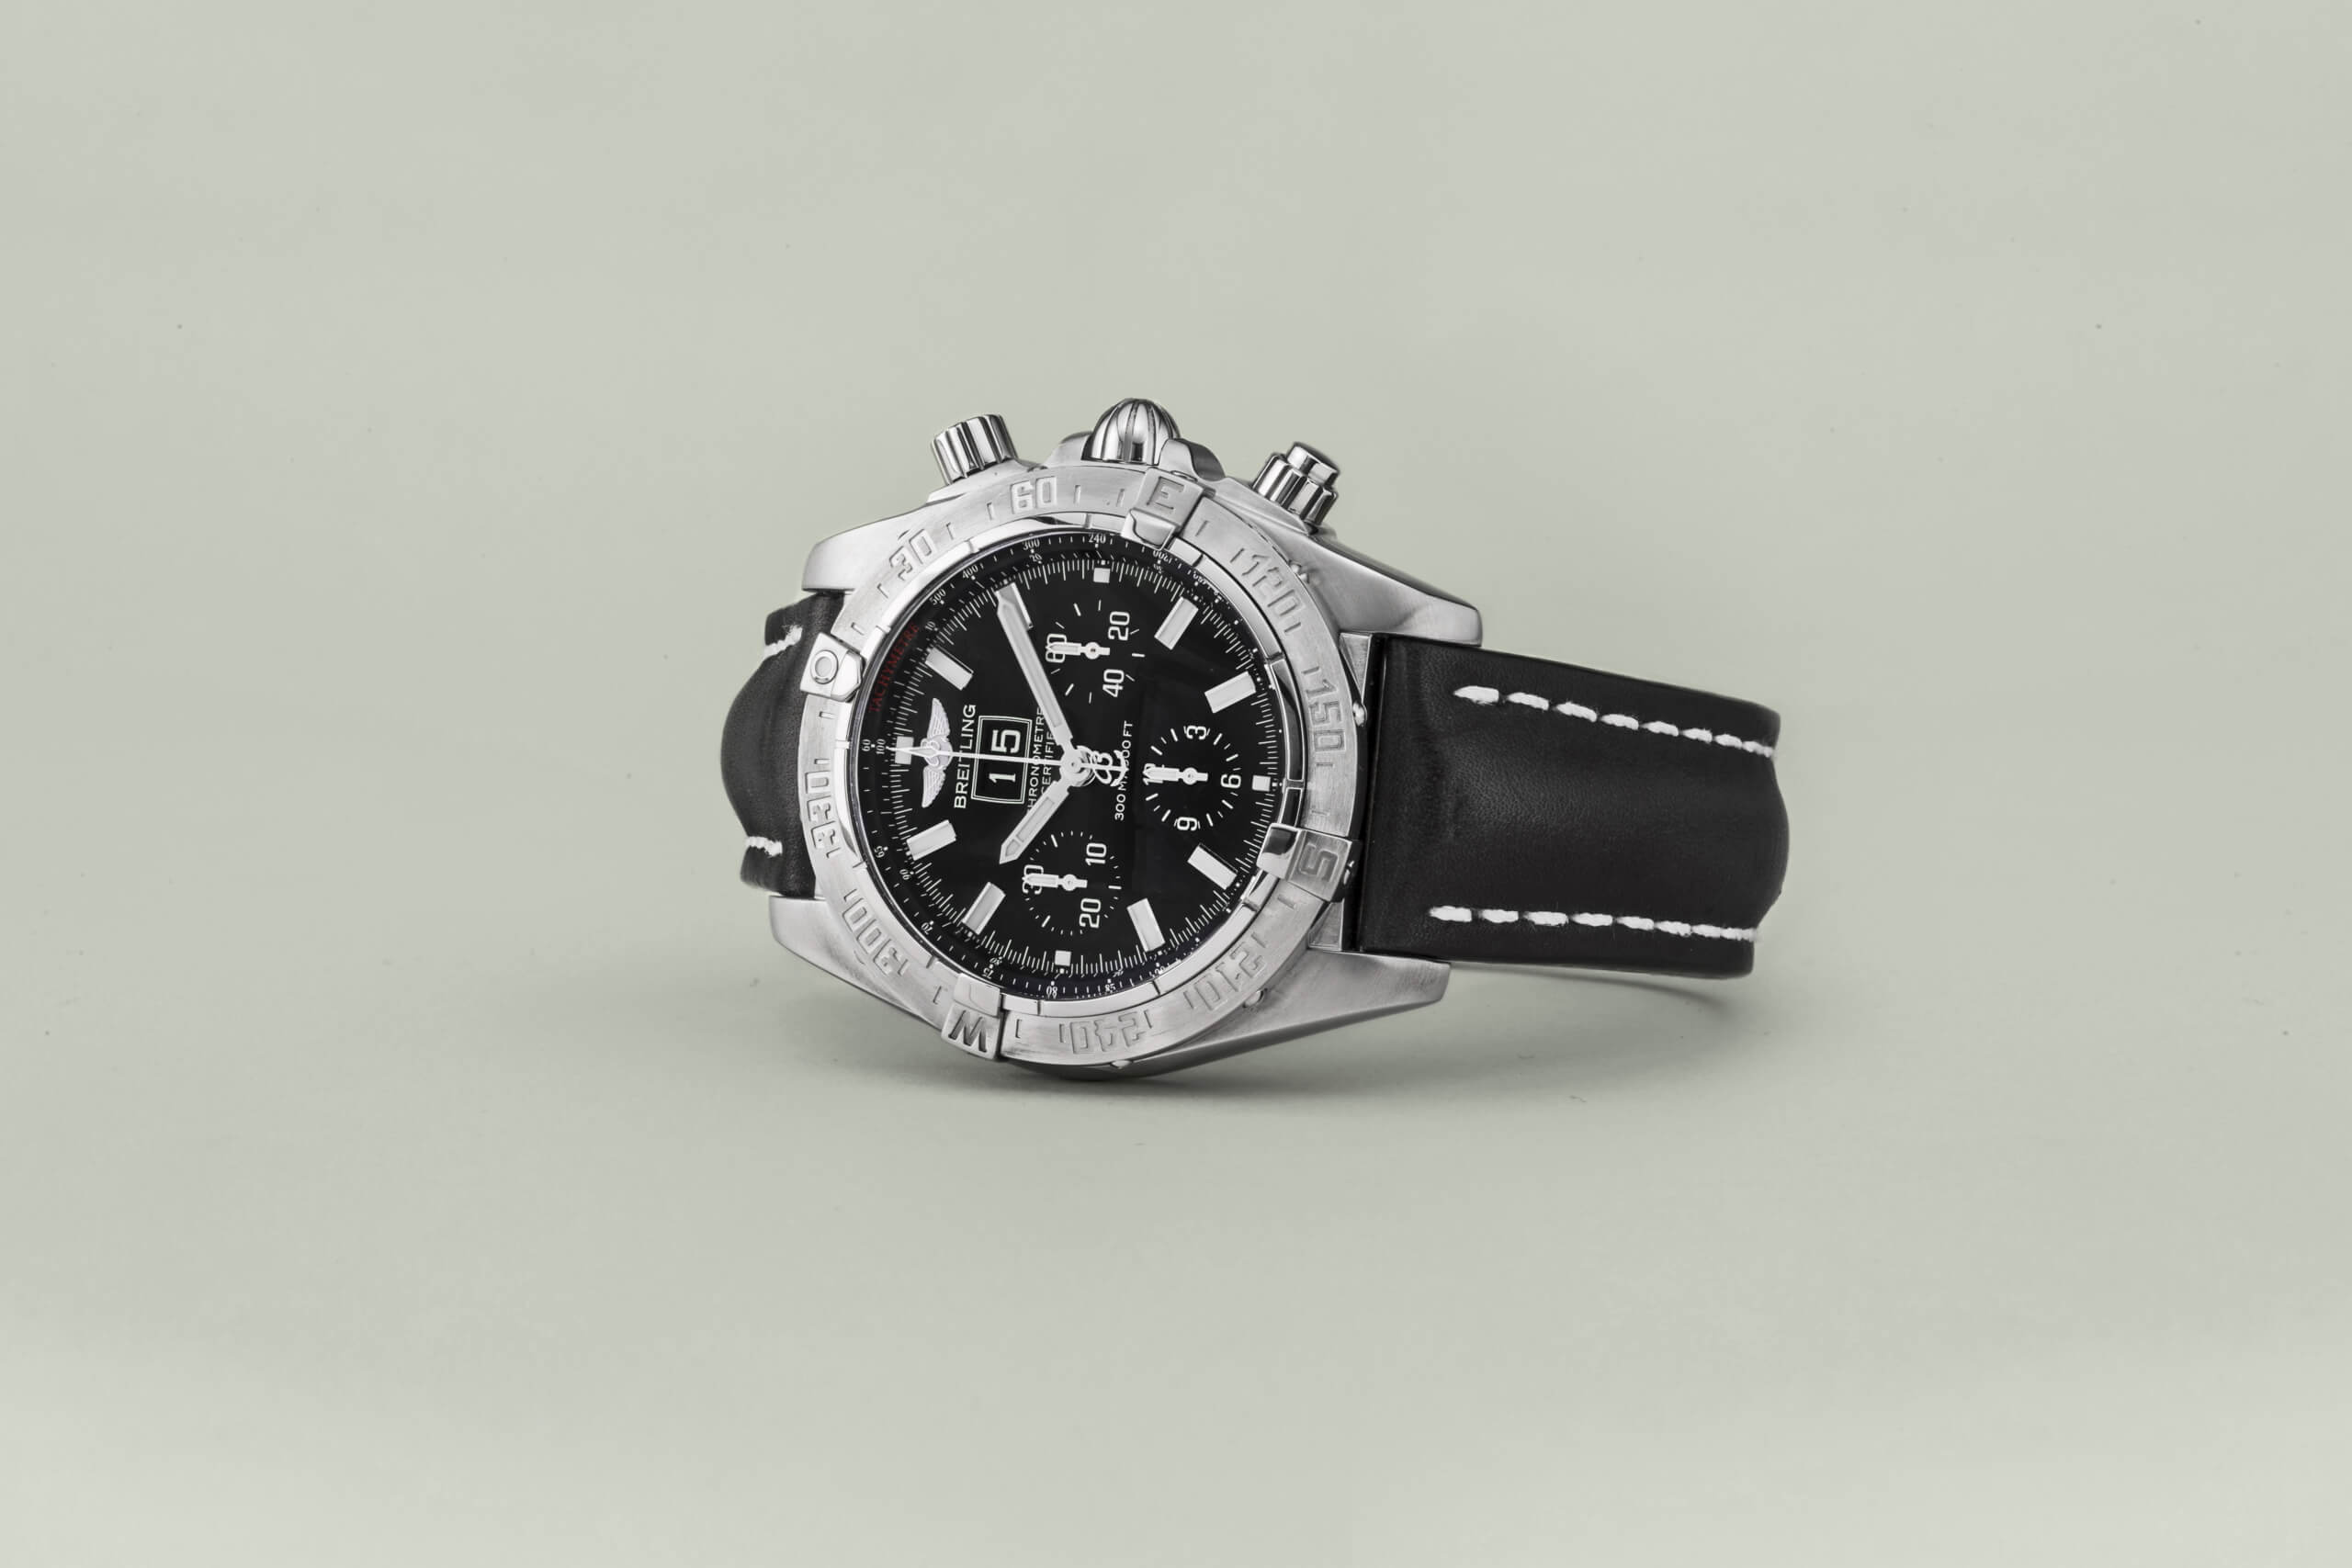 Breitling timepiece. With a black leather strap.